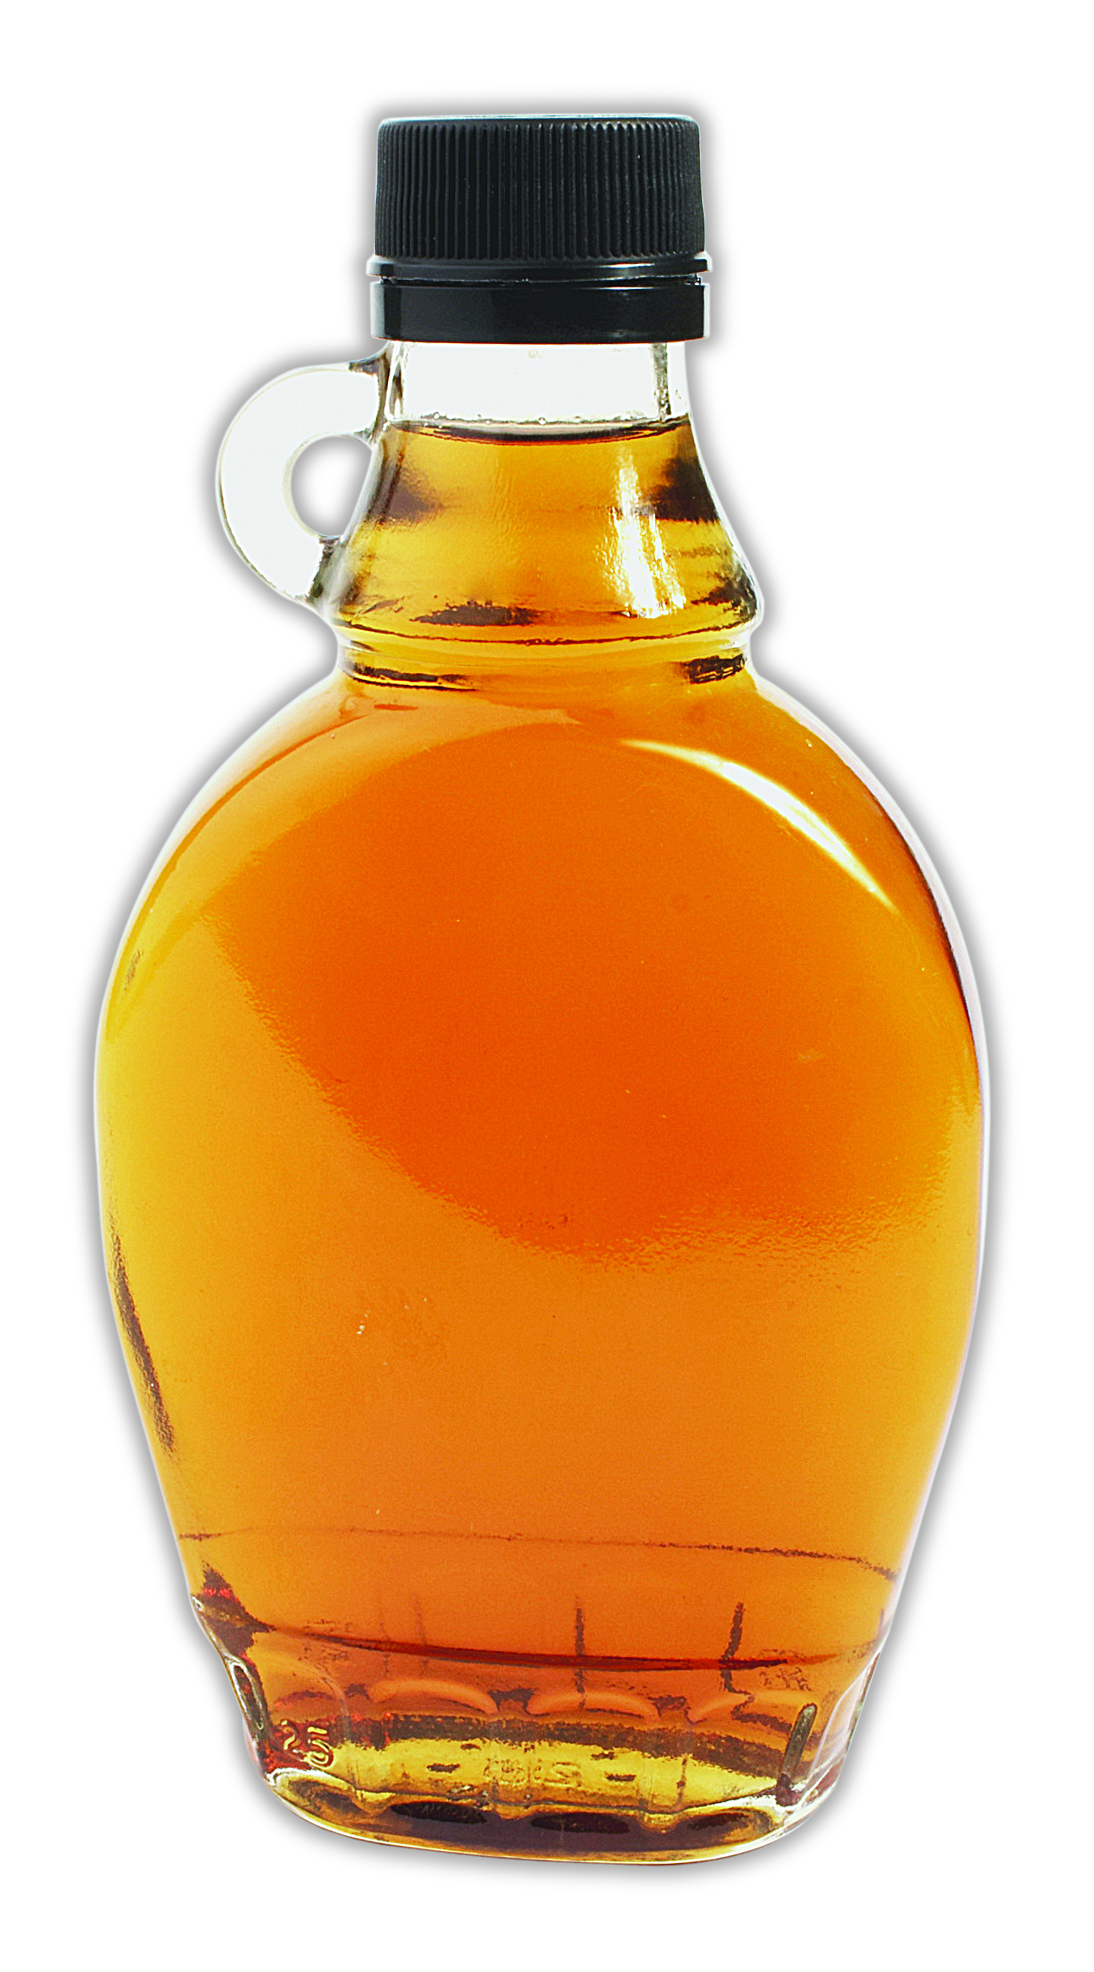 Maple syrup in a bottle as a picture for clipart free image download